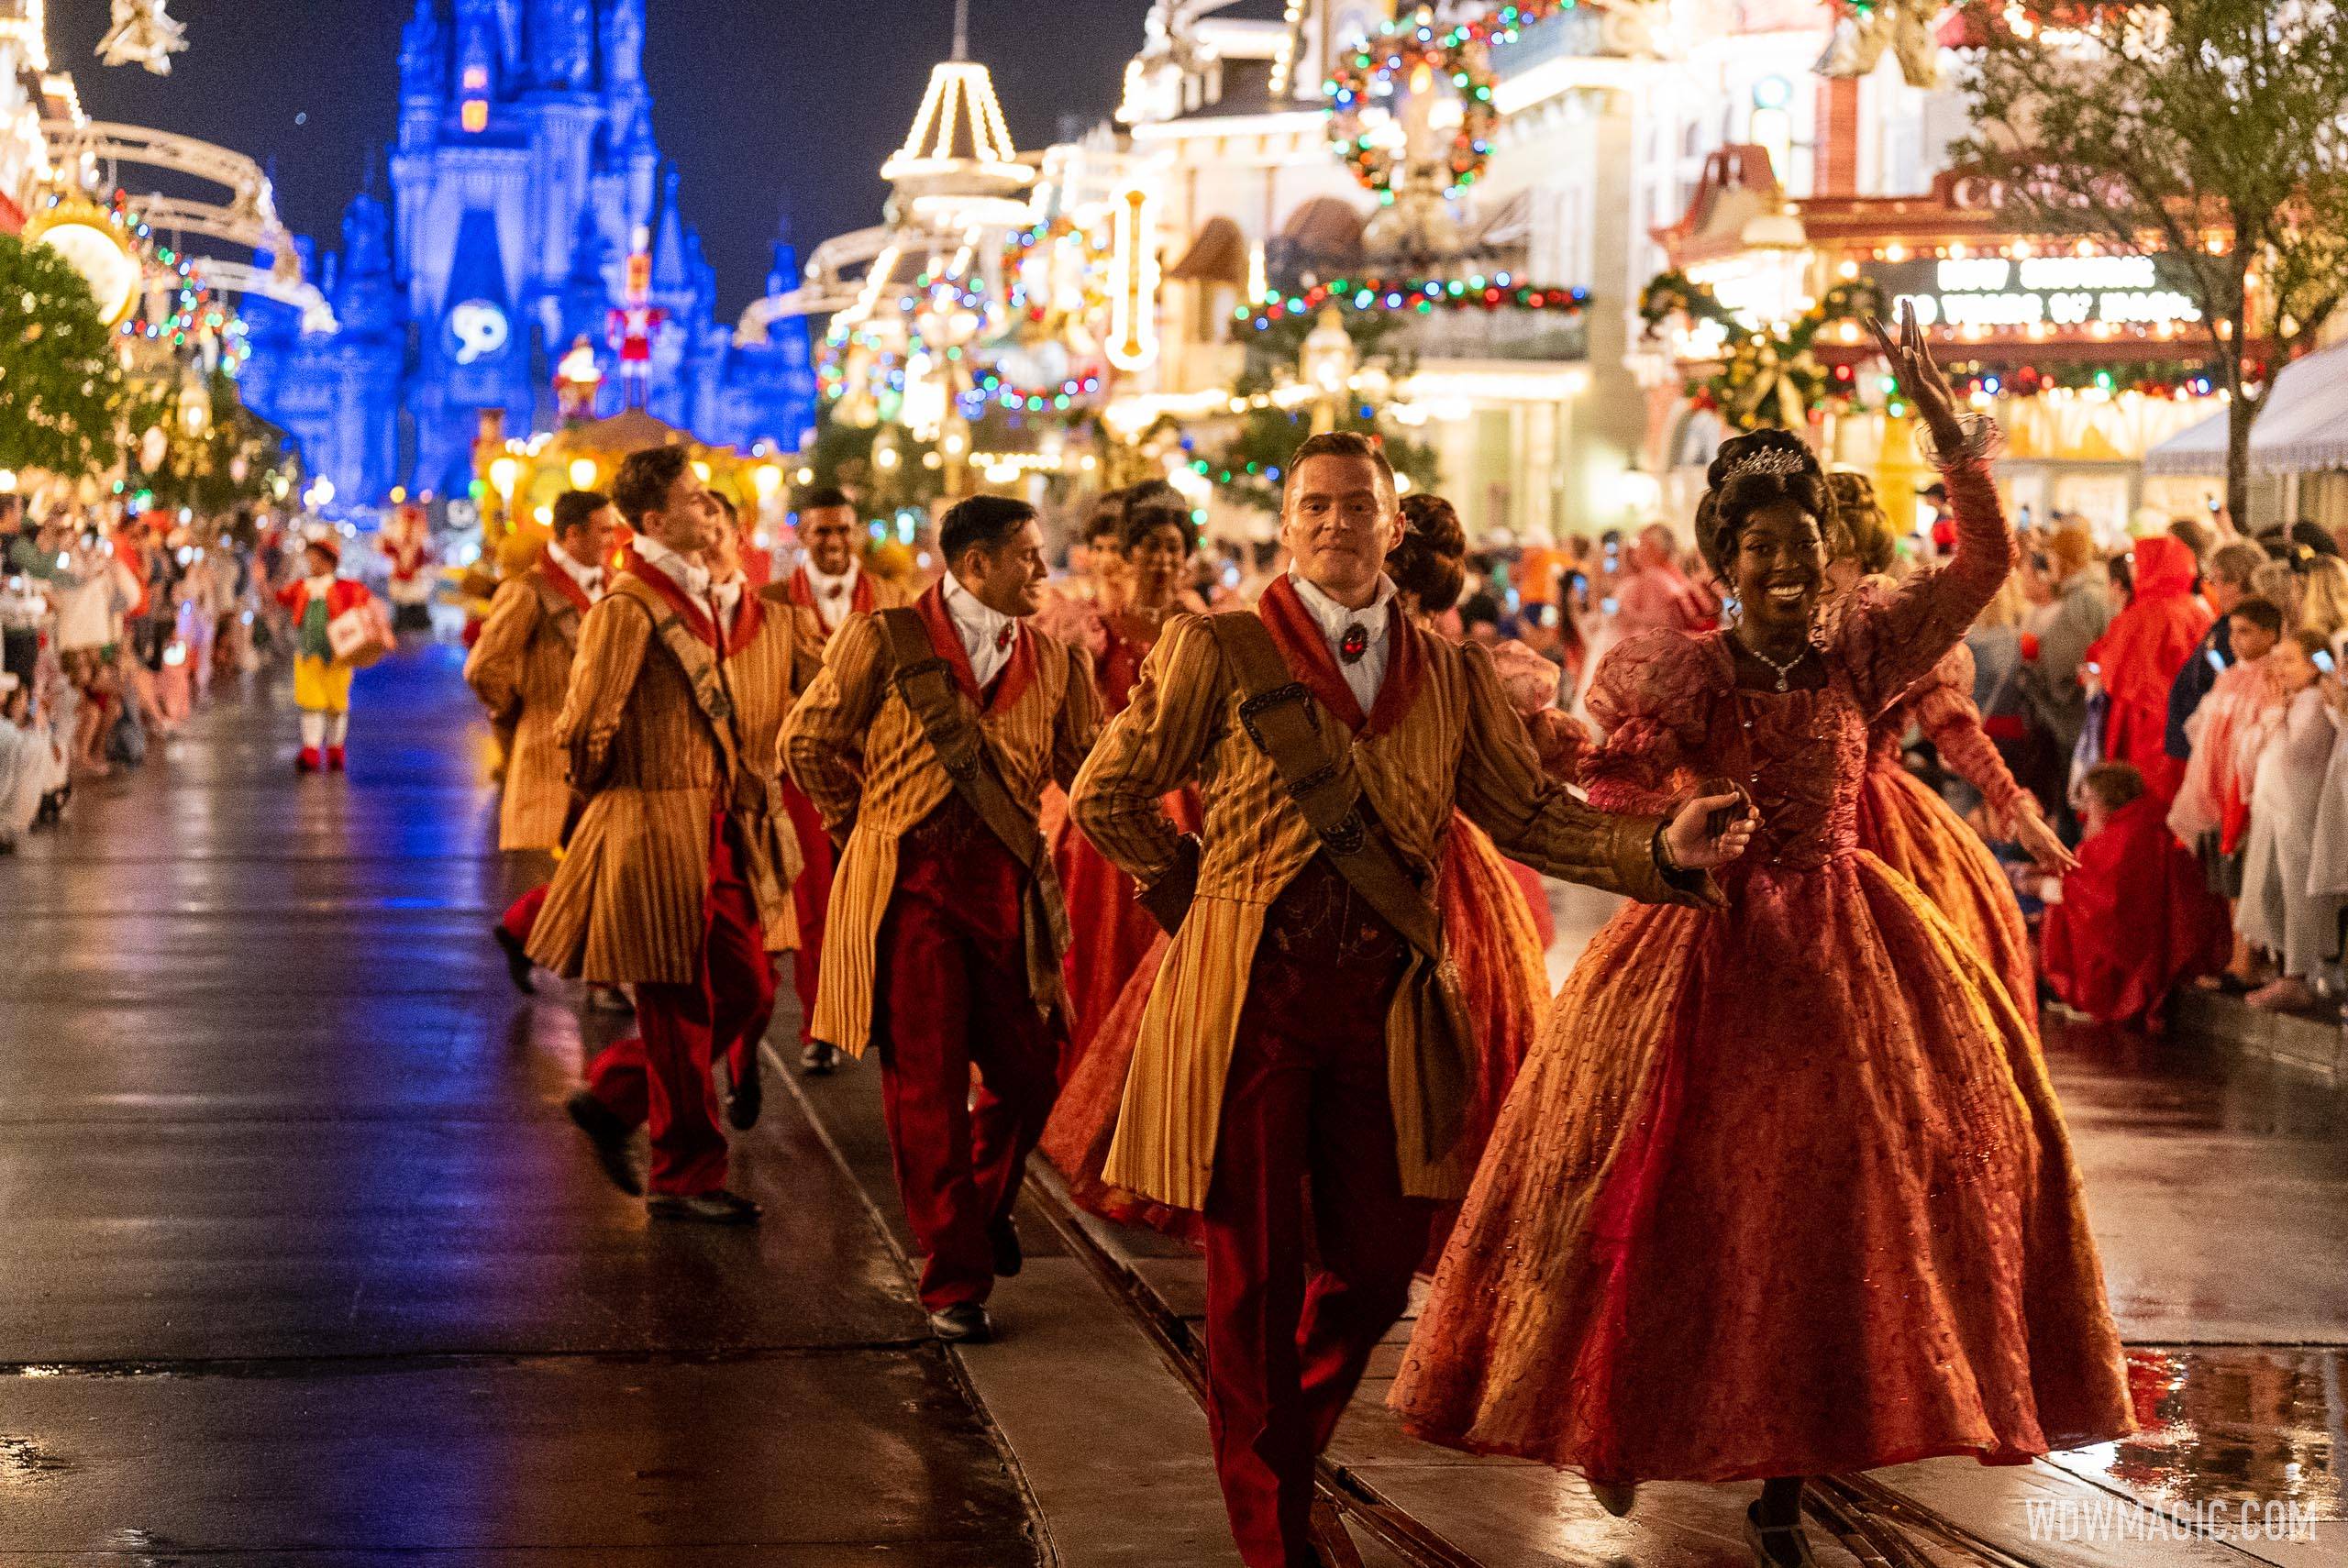 Mickey's Once Upon a Christmastime Parade scheduled during regular hours in mid-November at Magic Kingdom